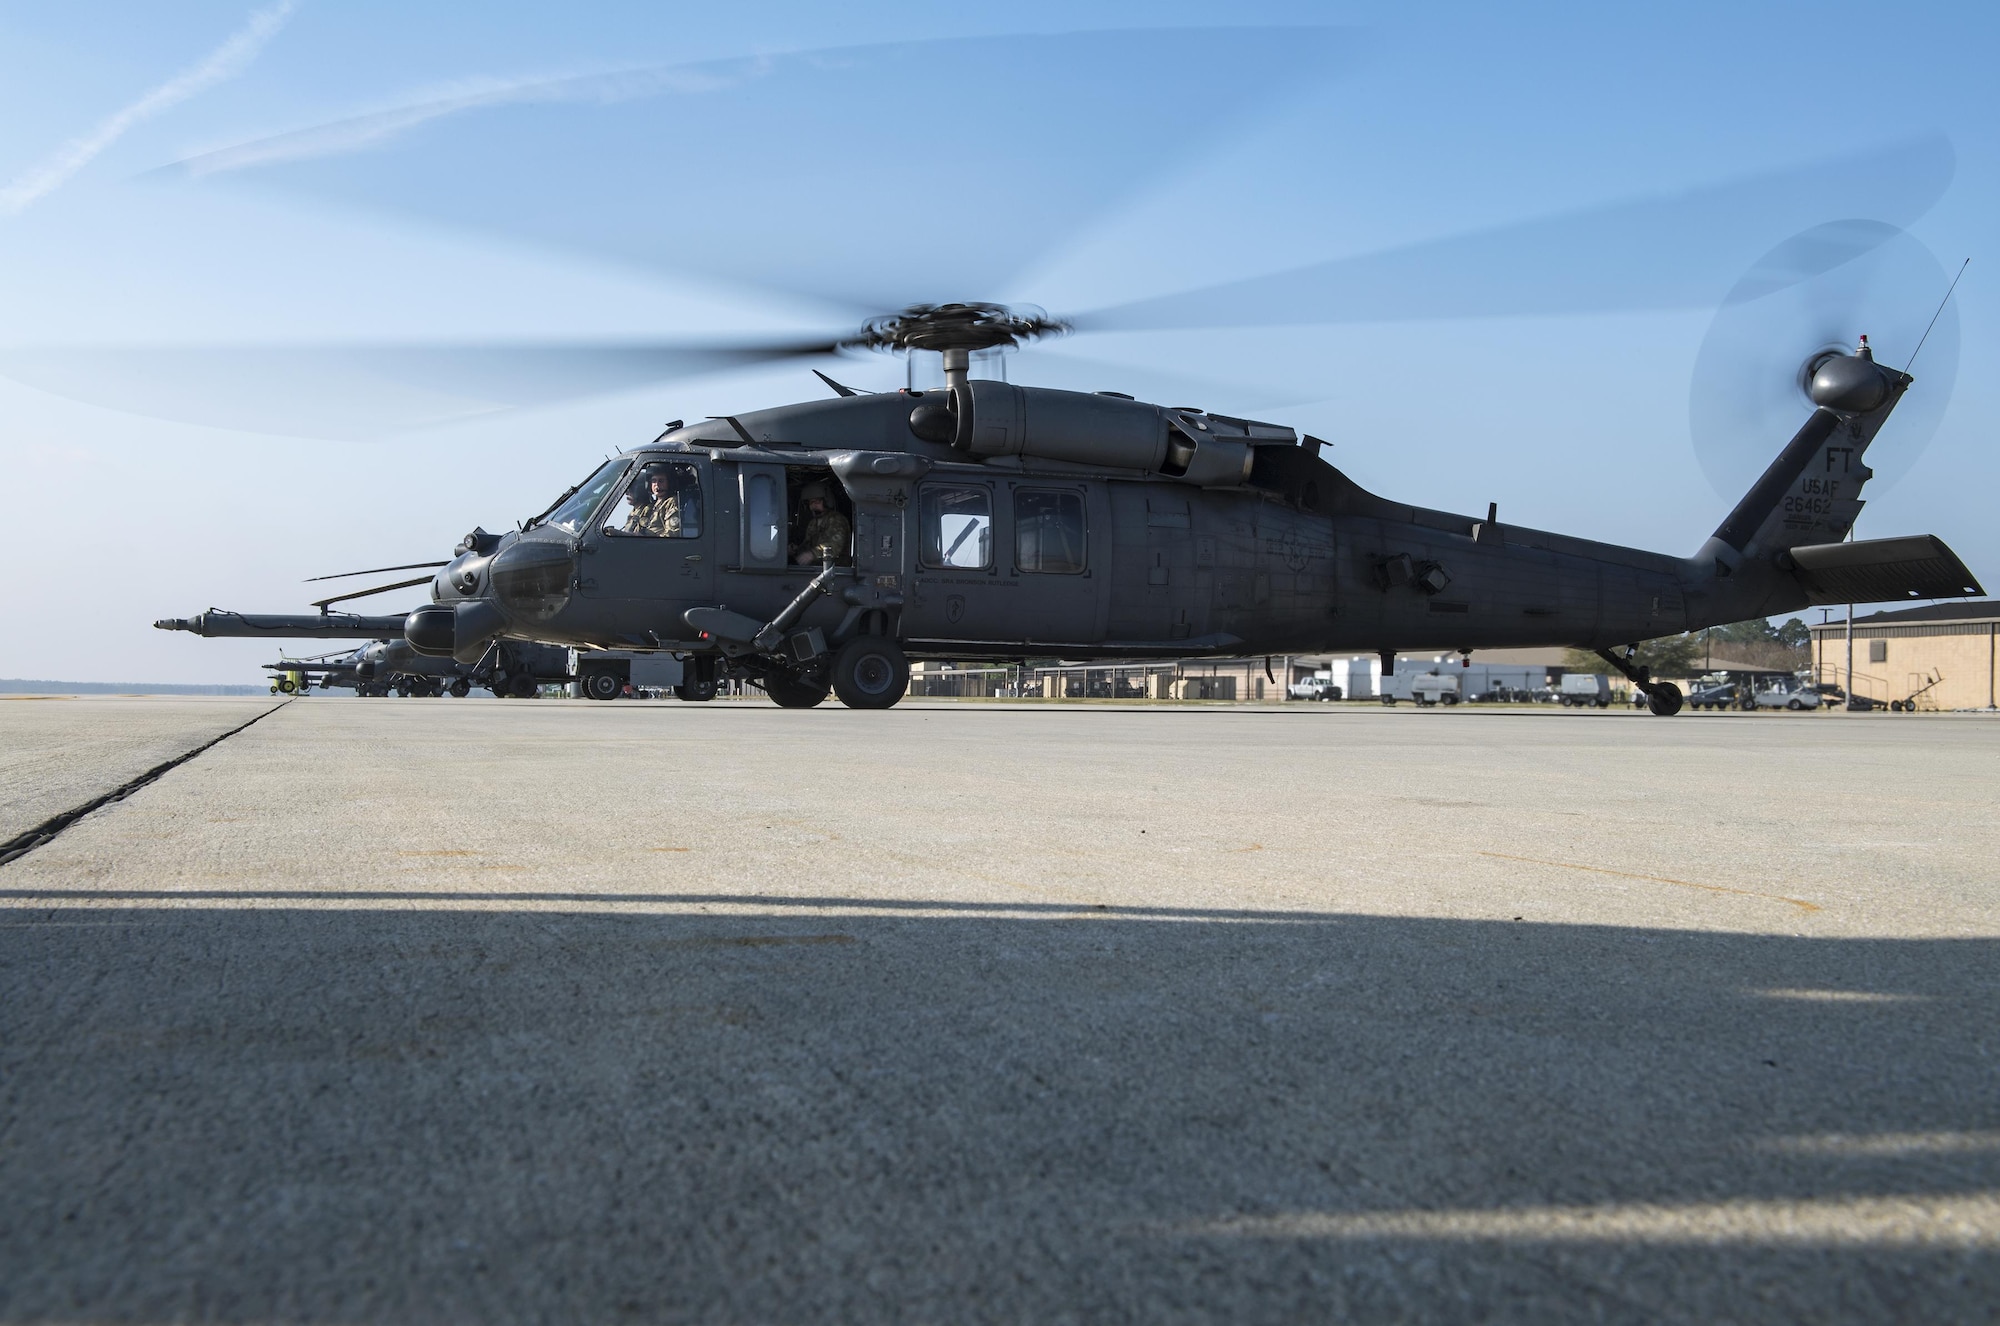 An HH-60G Pave Hawk fires up near the flightline while Airmen perform a preflight systems check, March 22, 2017, at Moody Air Force Base, Ga. The 41st HMU is responsible for Moody’s Pave Hawk fleet. Through innovation and preventative maintenance, they ensure each of their 13 Pave Hawks receive the upkeep needed to accomplish the mission. (U.S. Air Force photo by Airman 1st Class Janiqua P. Robinson)